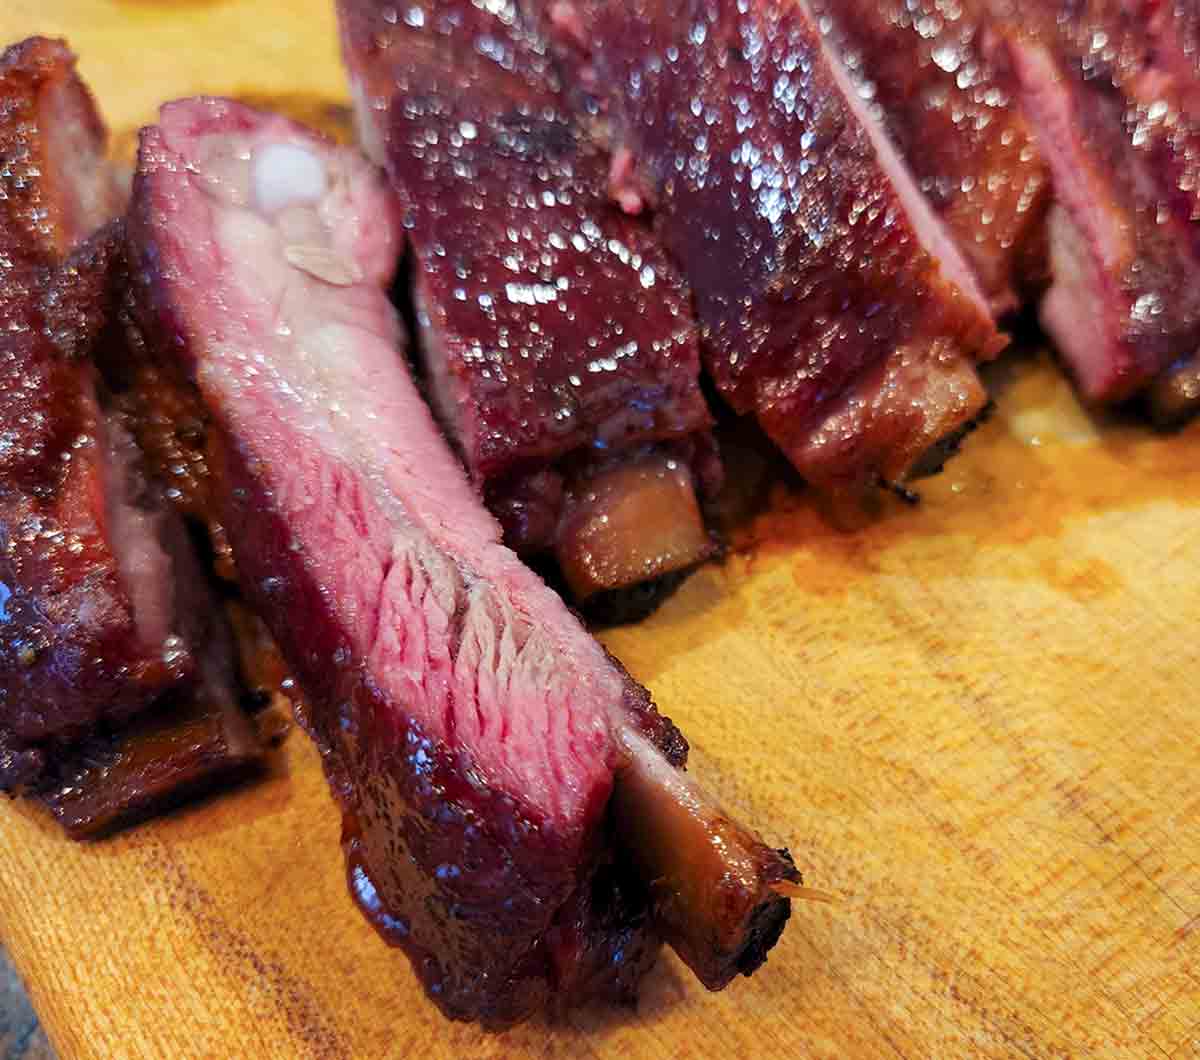 A rack of smoked pork ribs cut into individual ribs on a wooden cutting board.